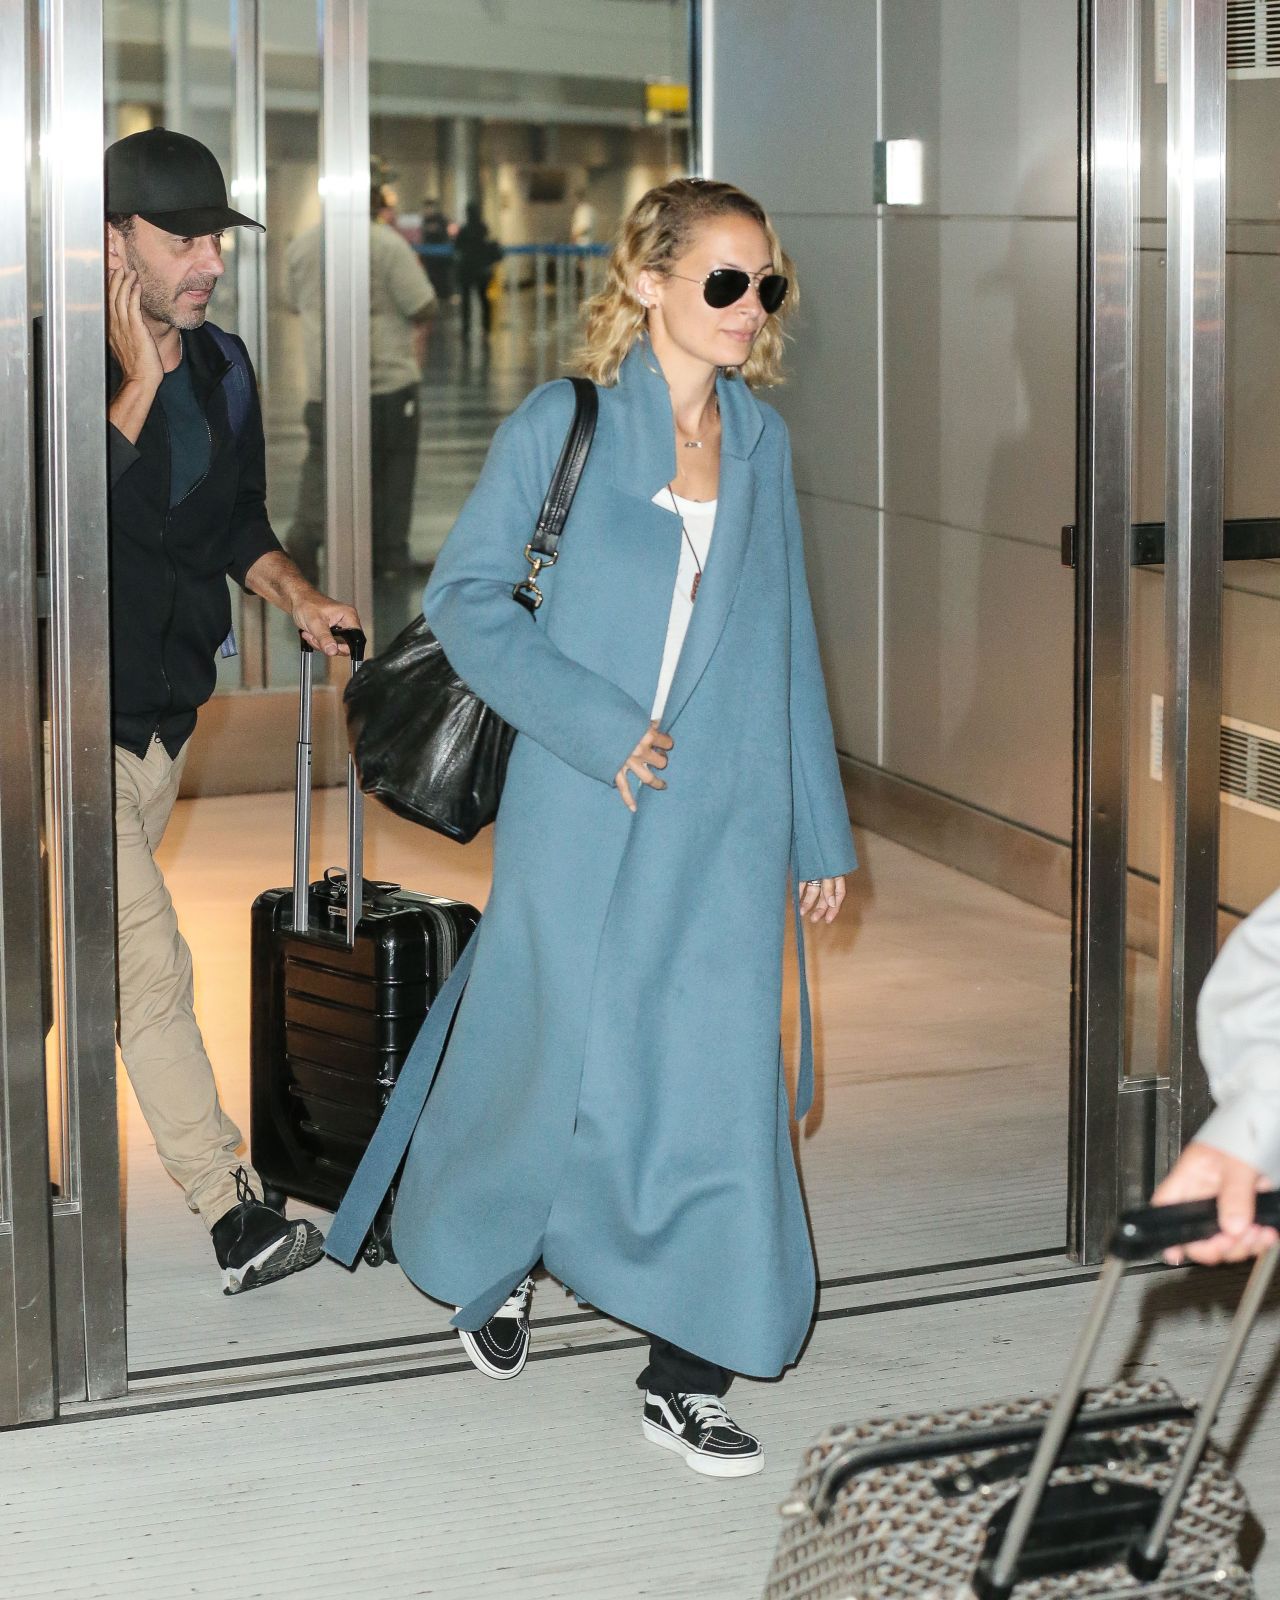 Nicole Richie in Travel Outfit - JFK Airport in NY 06/19/2017 • CelebMafia